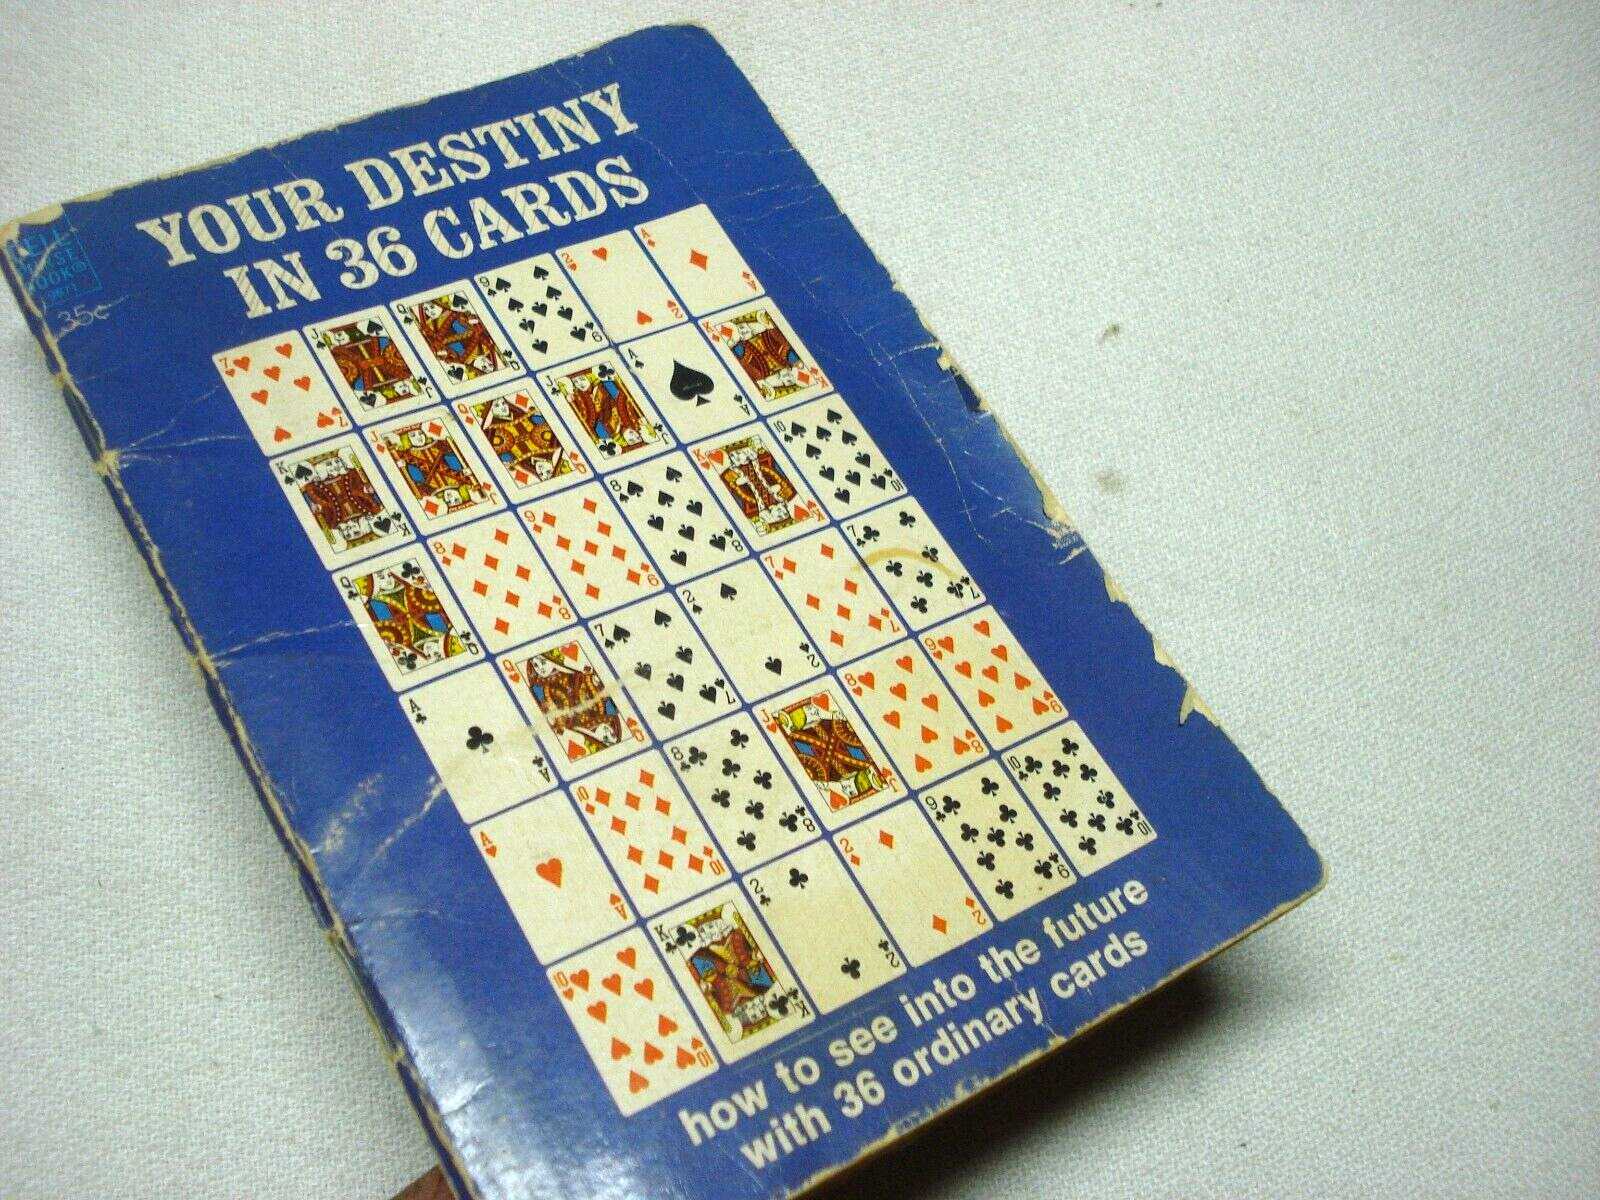 Vtg 1969 Dell Press Your Destiny In 36 Cards How To See Your Future Tarot Book